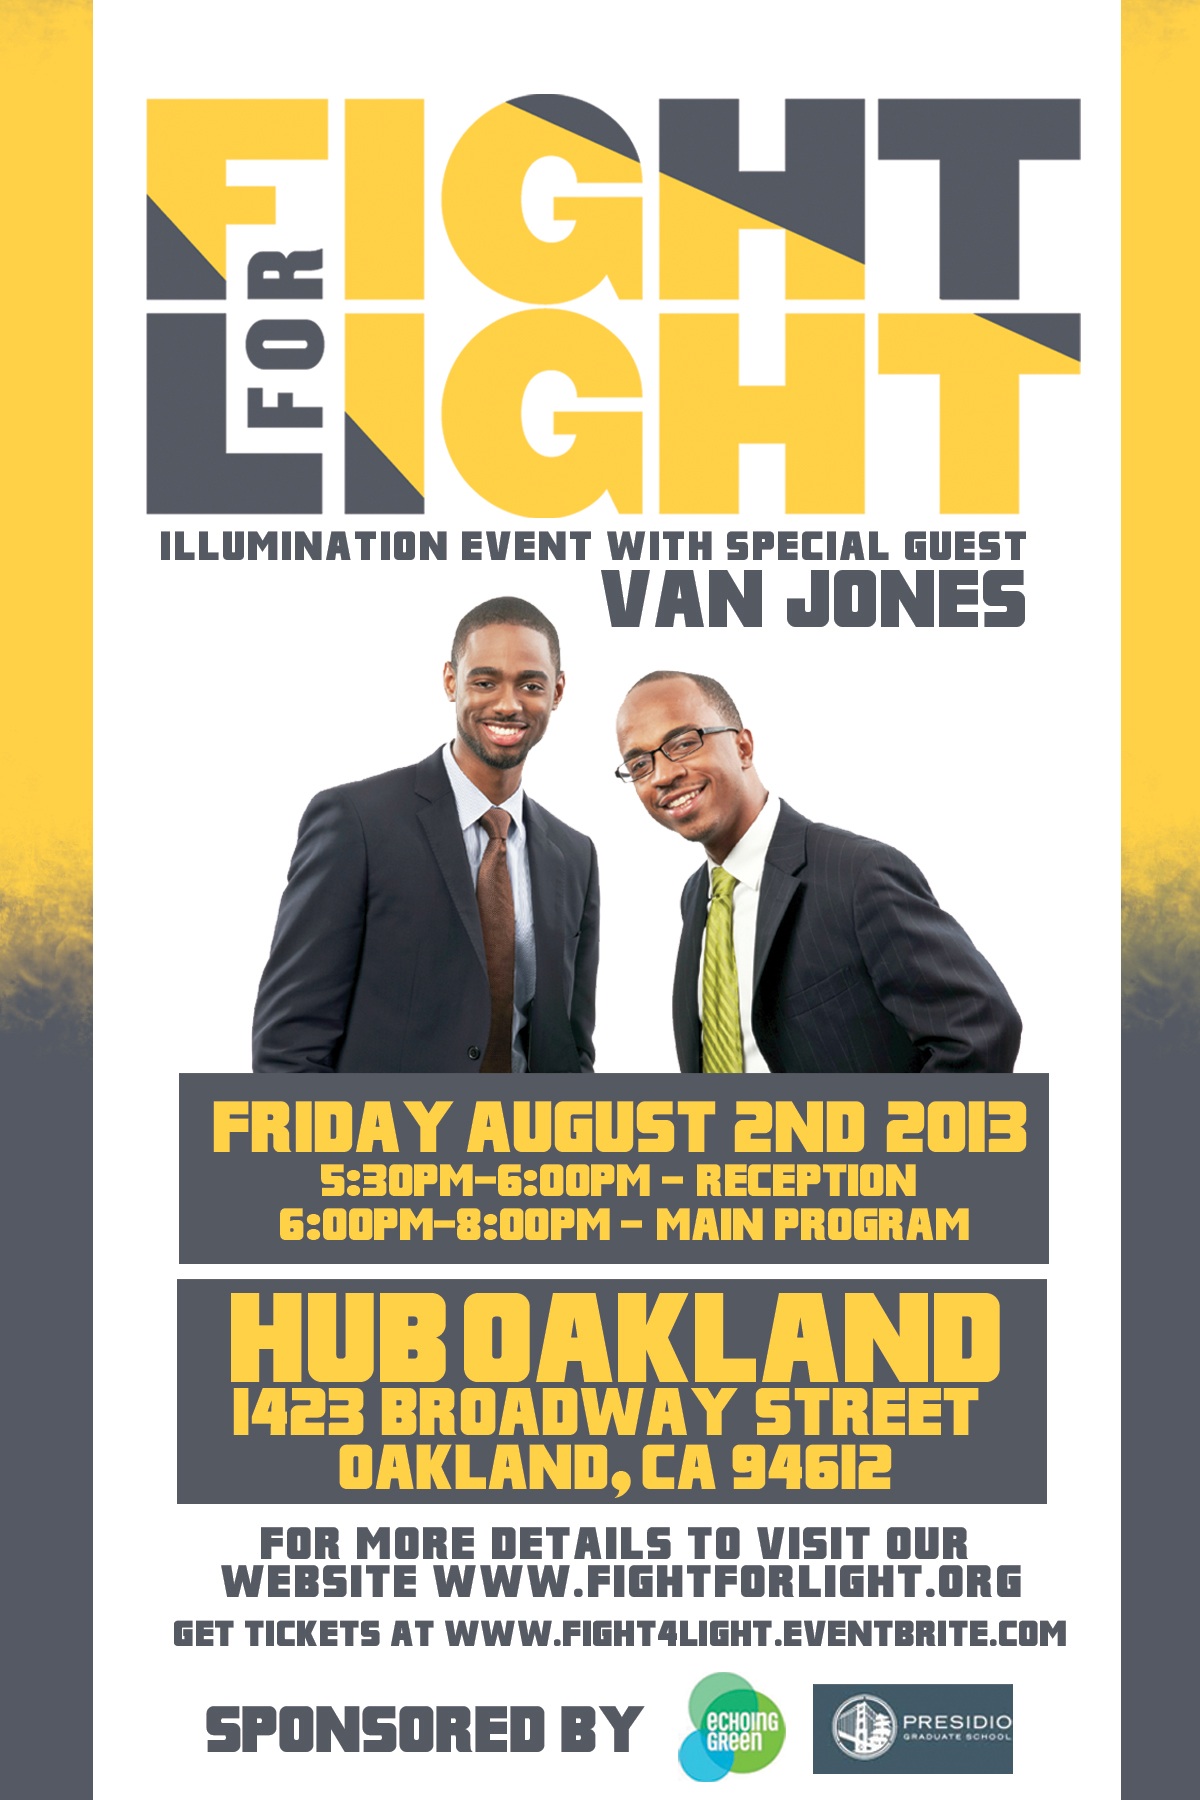 Two Young Morehouse Men Hosting Fundraising Event with Special Guest Van Jones on Friday, August 2nd